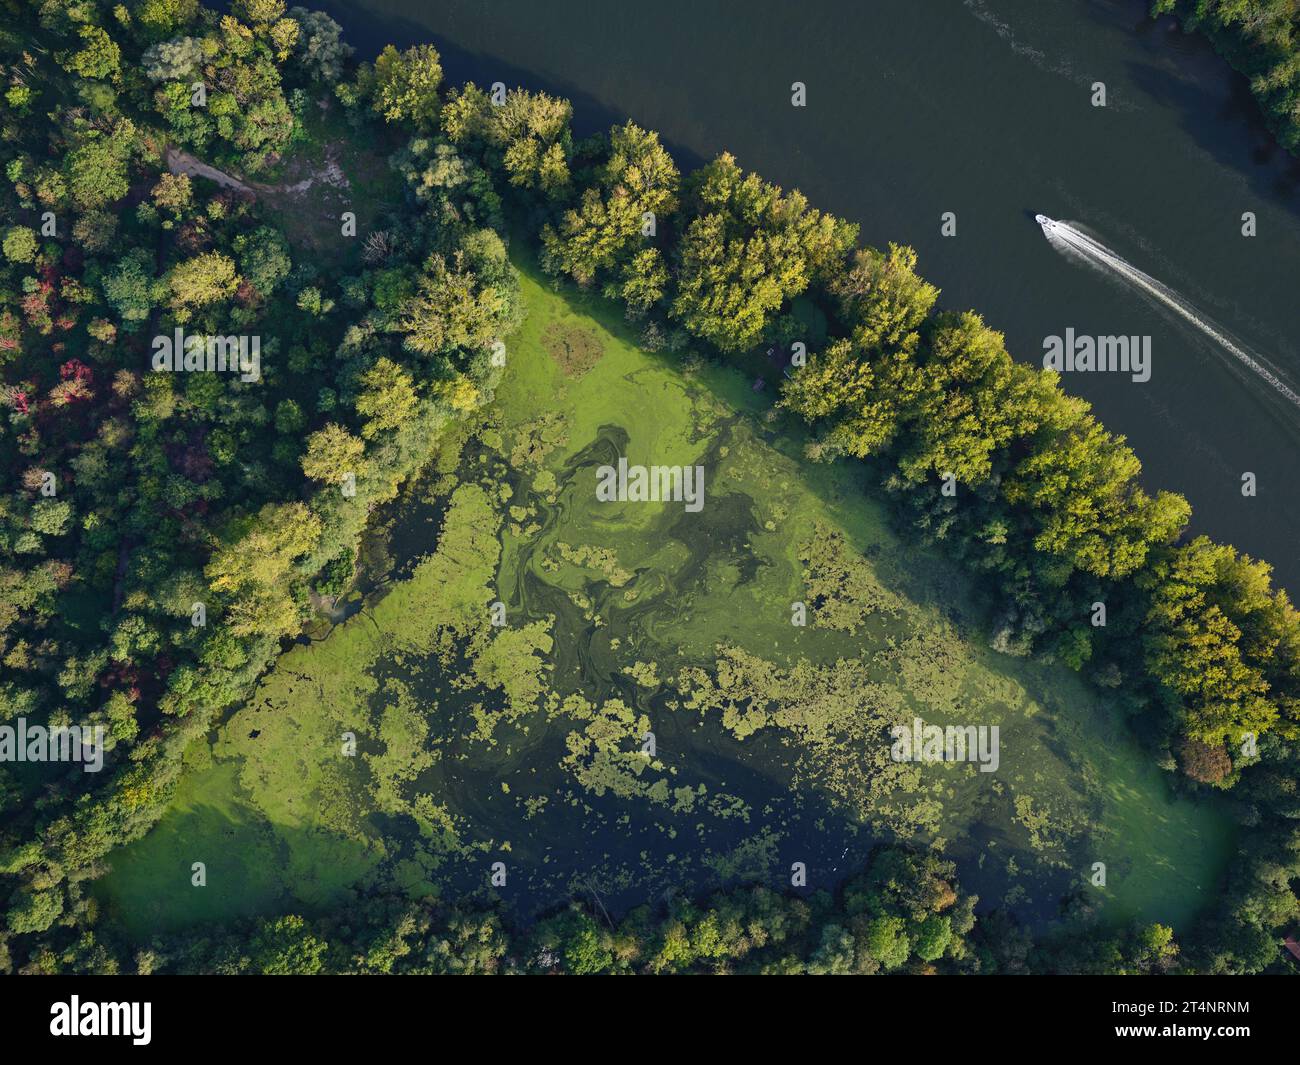 VERTICAL AERIAL VIEW. Triangular pond with green algae on the left bank of the Moselle River, outboard motorboat passing by. Moulins-lès-Metz, France. Stock Photo